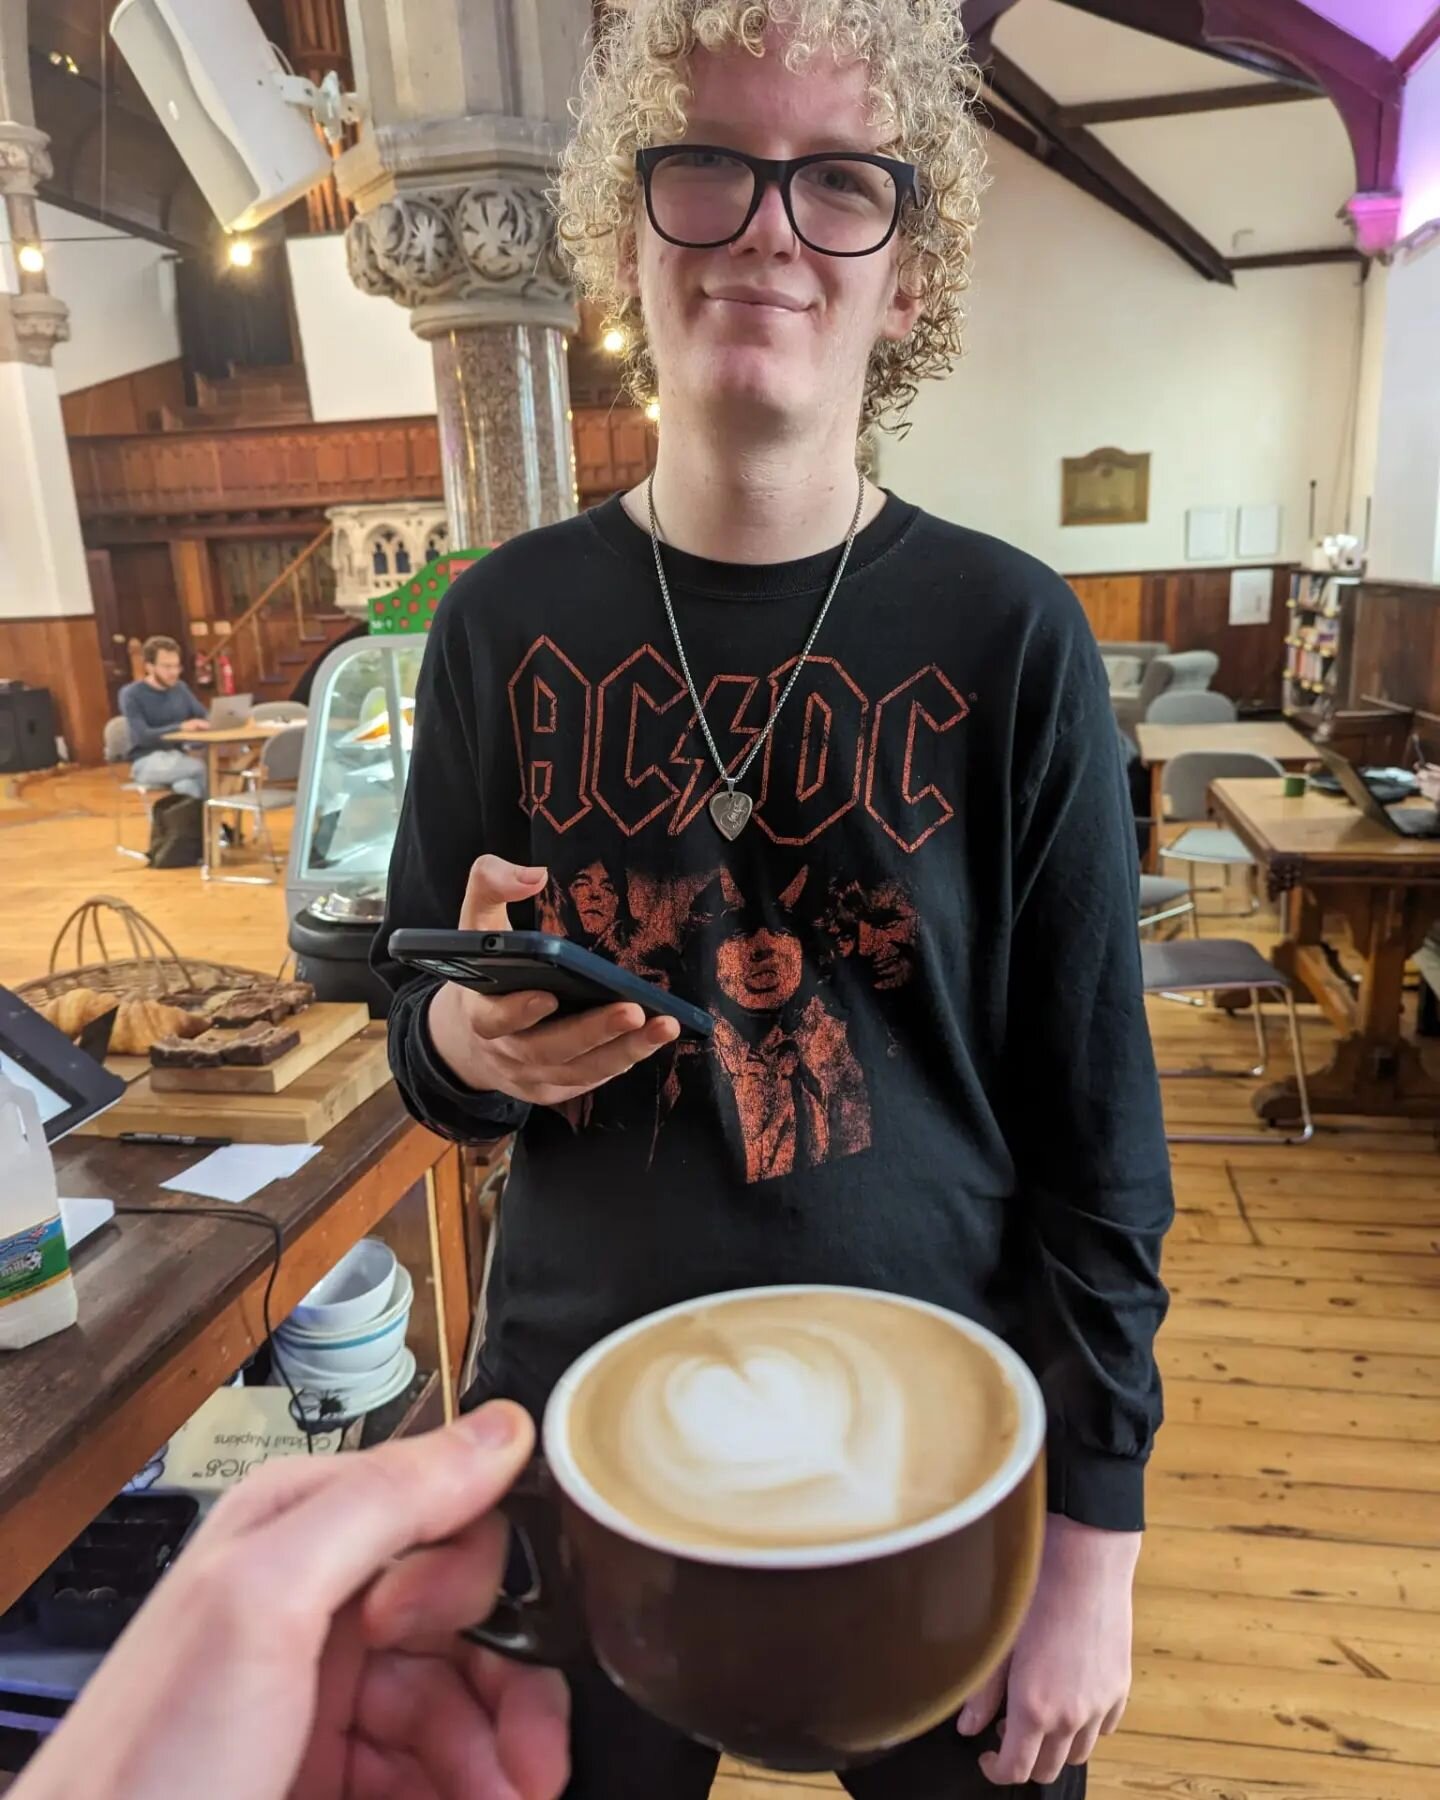 An excellent mocha made by one of our excellent work experience students up at our training cafe @floroadmarket

When you complete one of our training courses you are eligible for our free work experience programme! It's a great way to bridge that ga